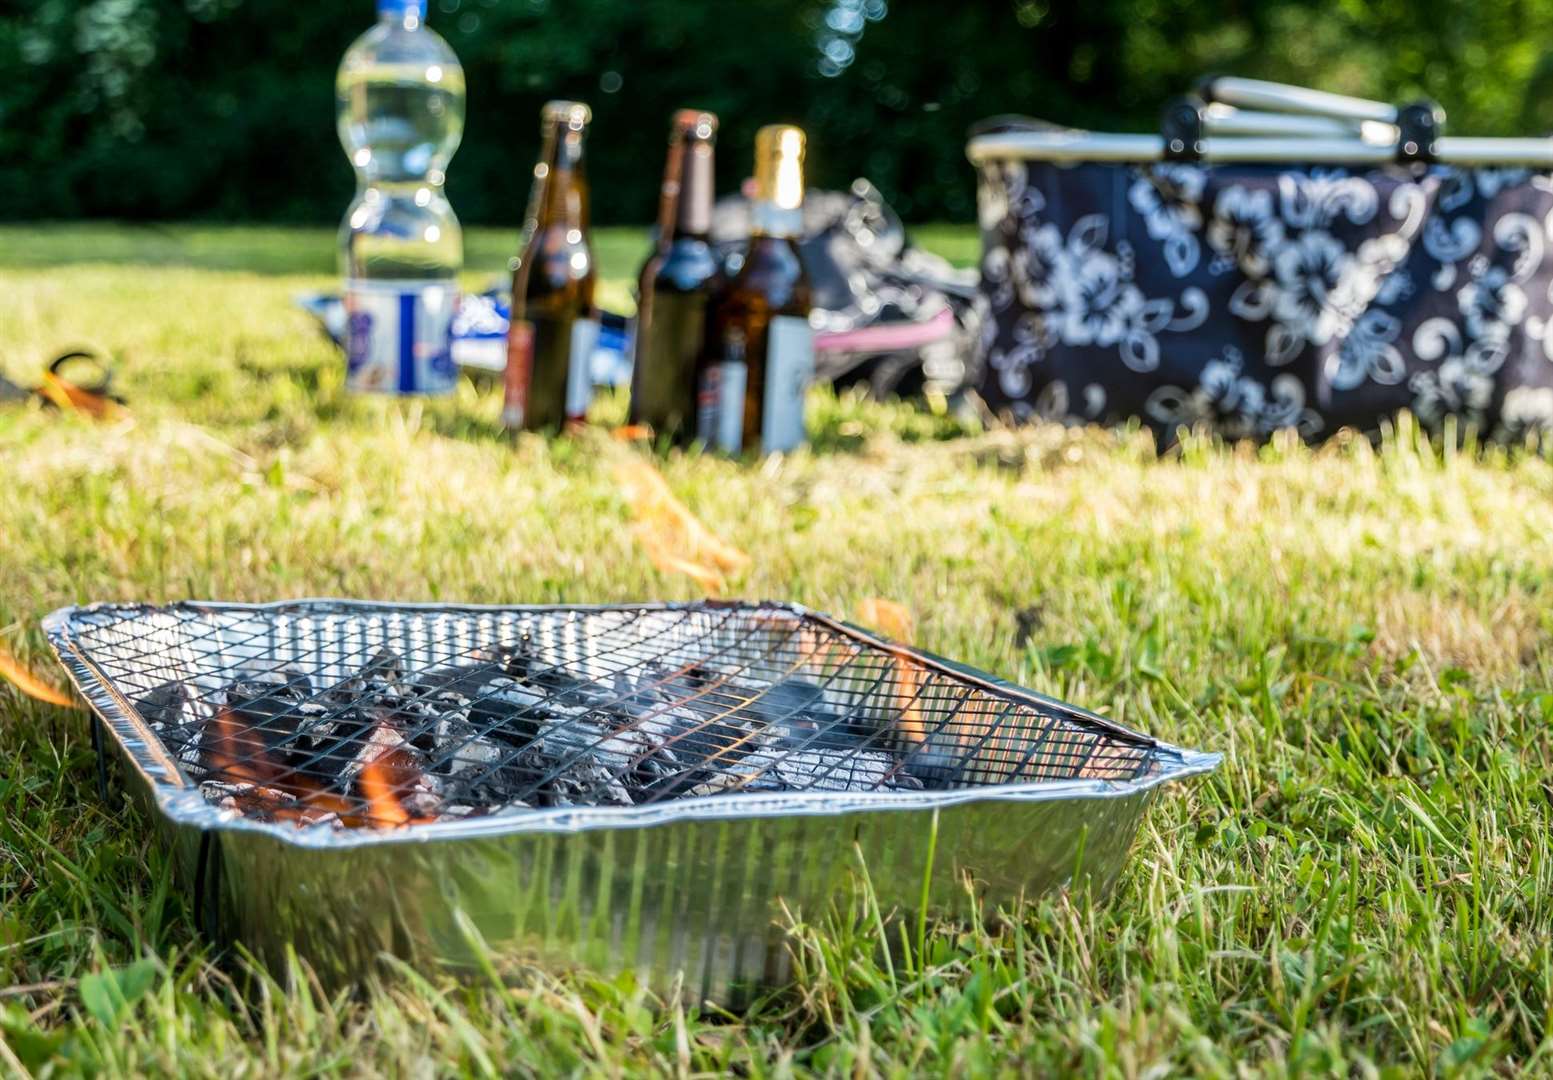 The BRC has launched disposable barbecue safety advice. Image: iStock.